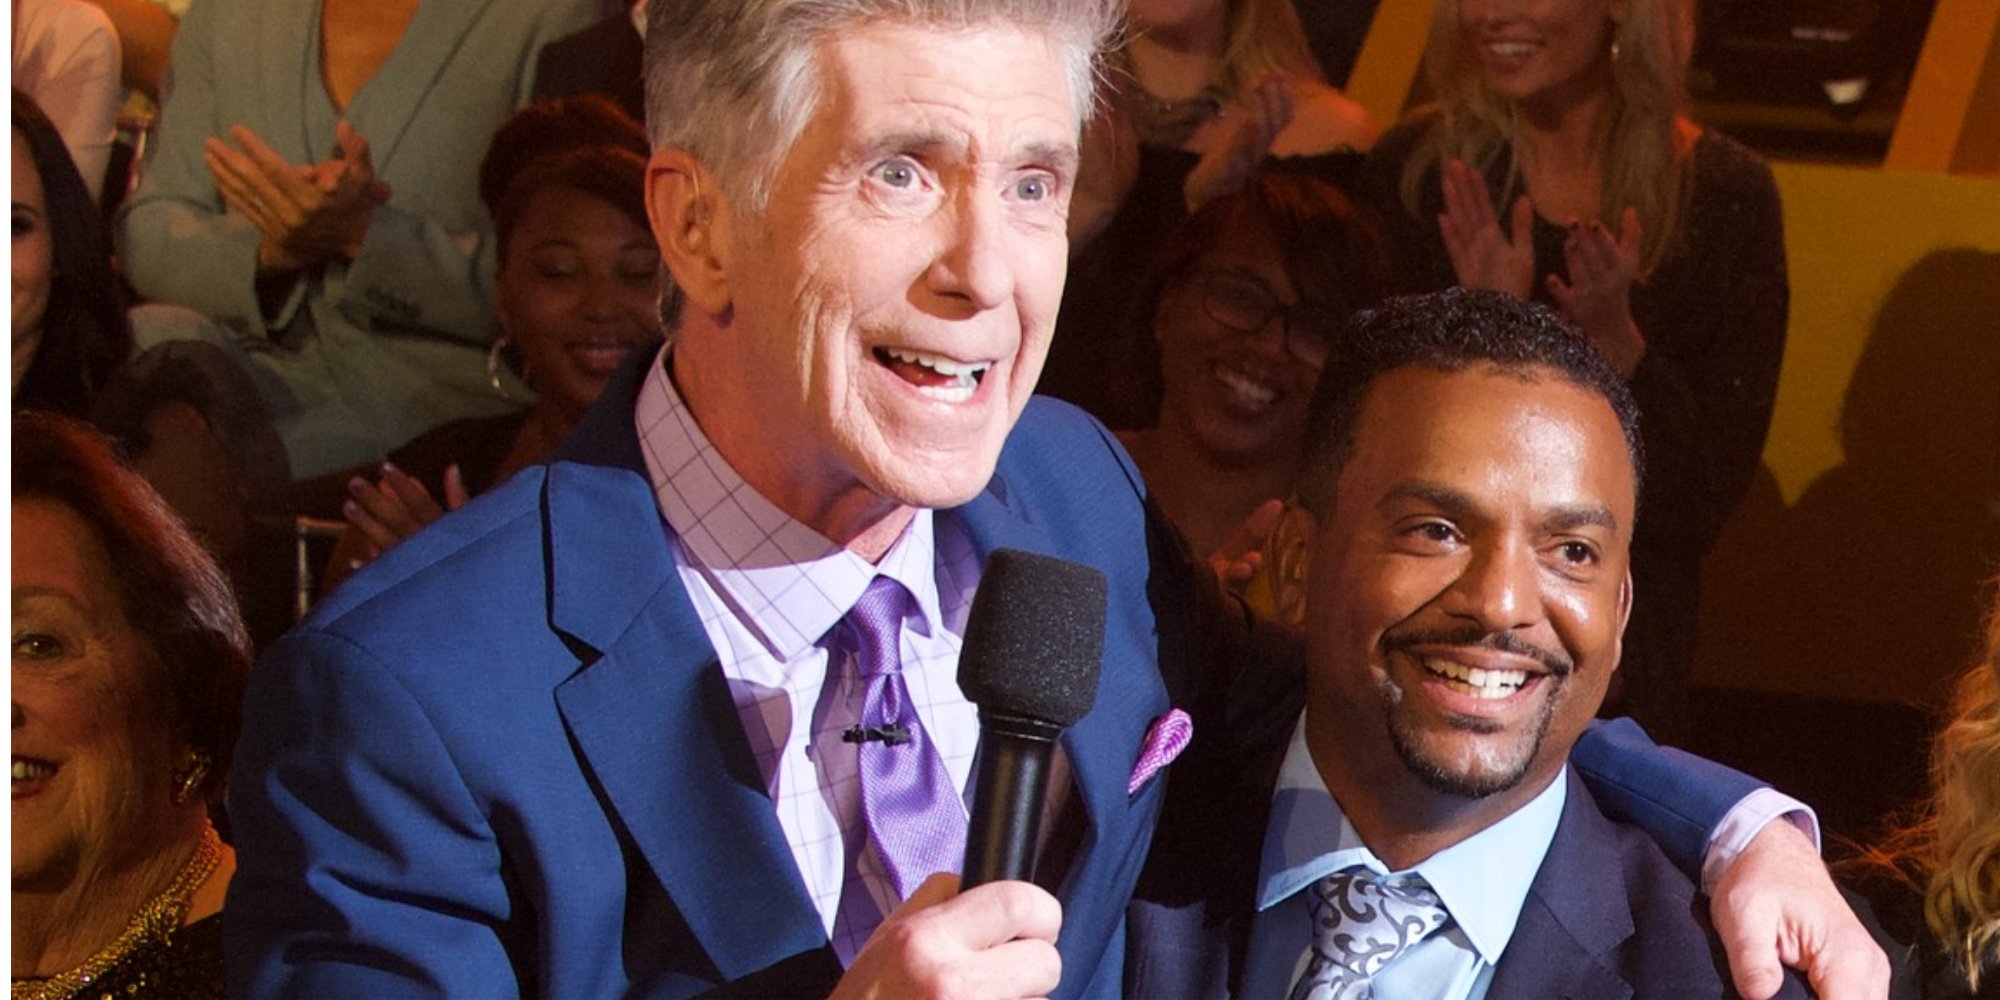 Tom Bergeron and Alfonso Ribeiro on the set of 'Dancing with the Stars' in 2019.